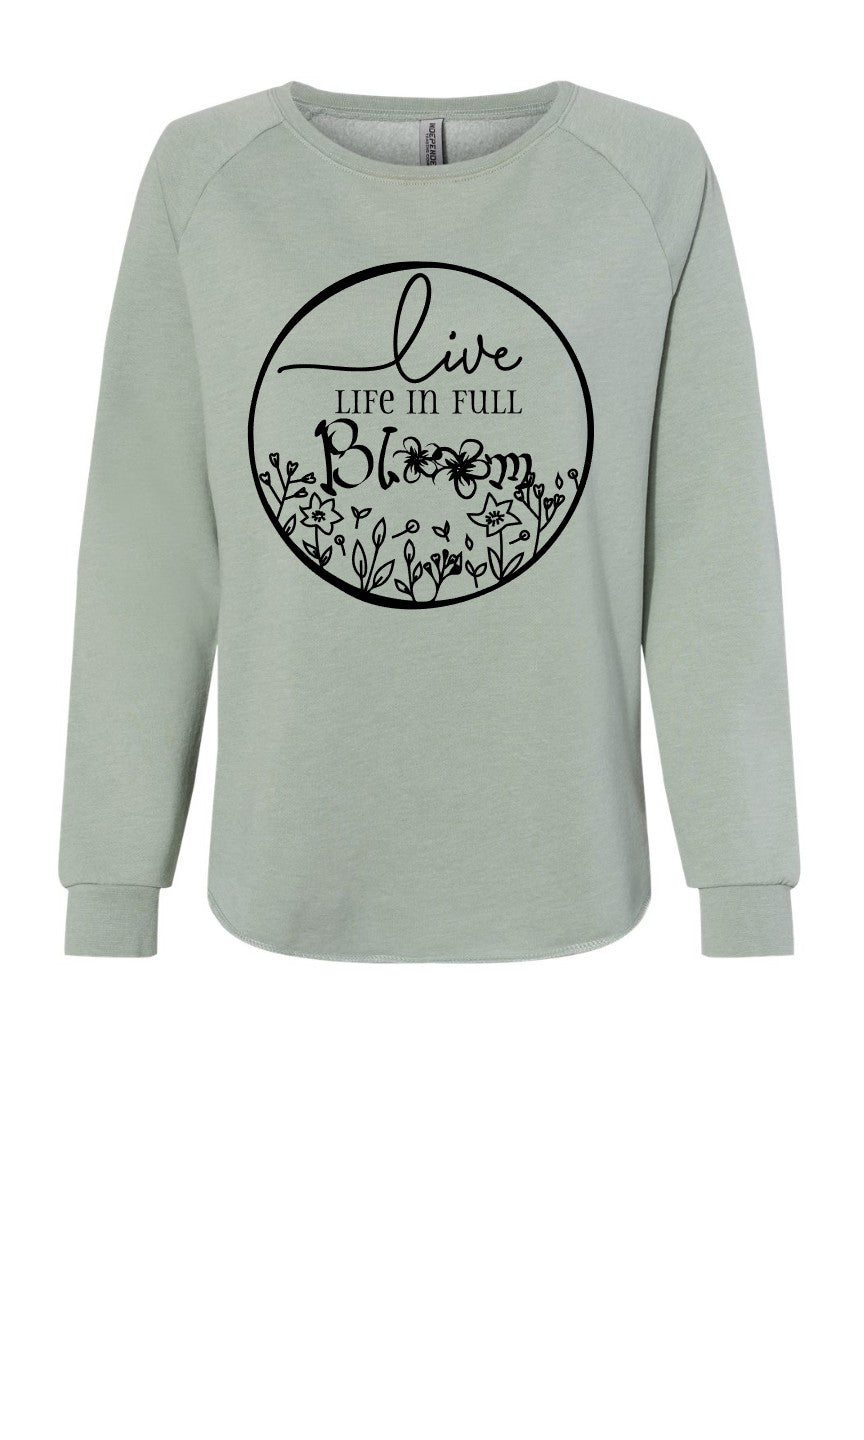 Live life in full Bloom | Lightweight Sweater - My Other Child / Blooms n' Rooms